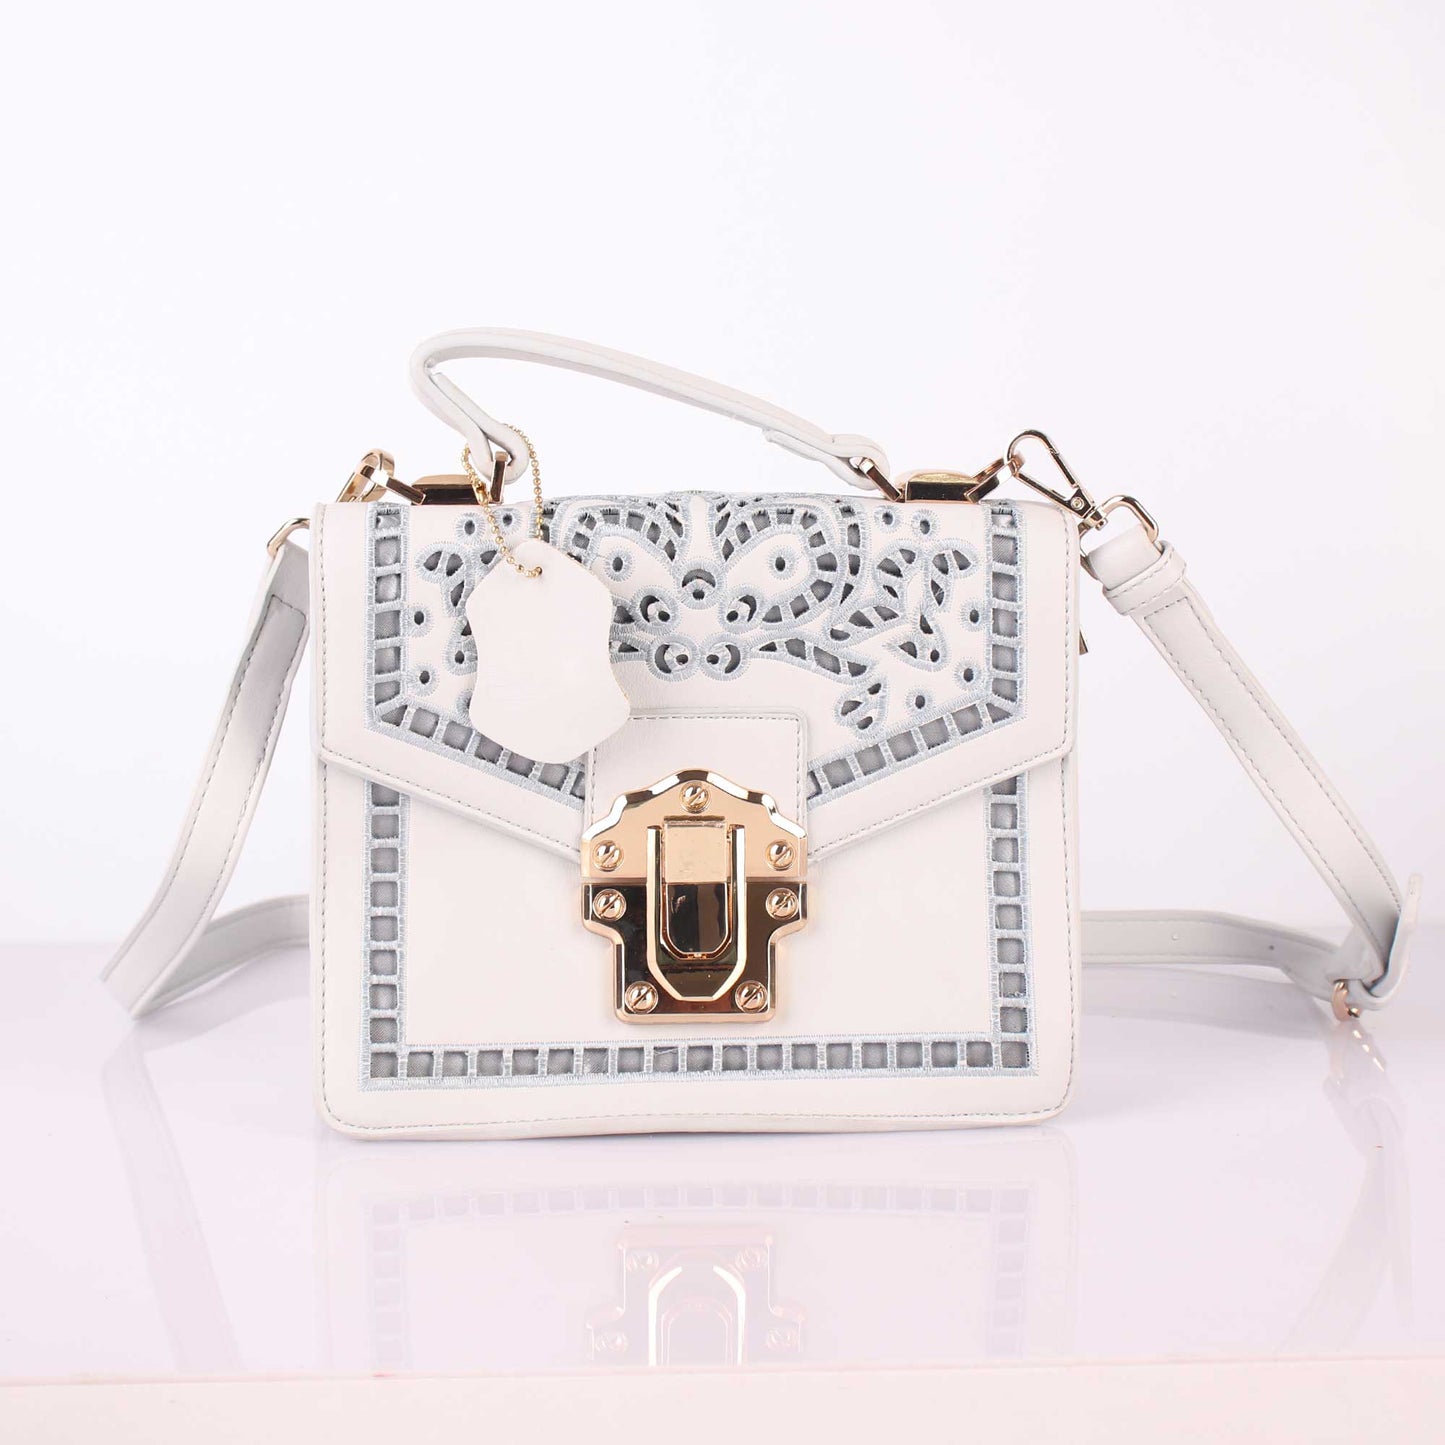 The Punched Sling Bag in White